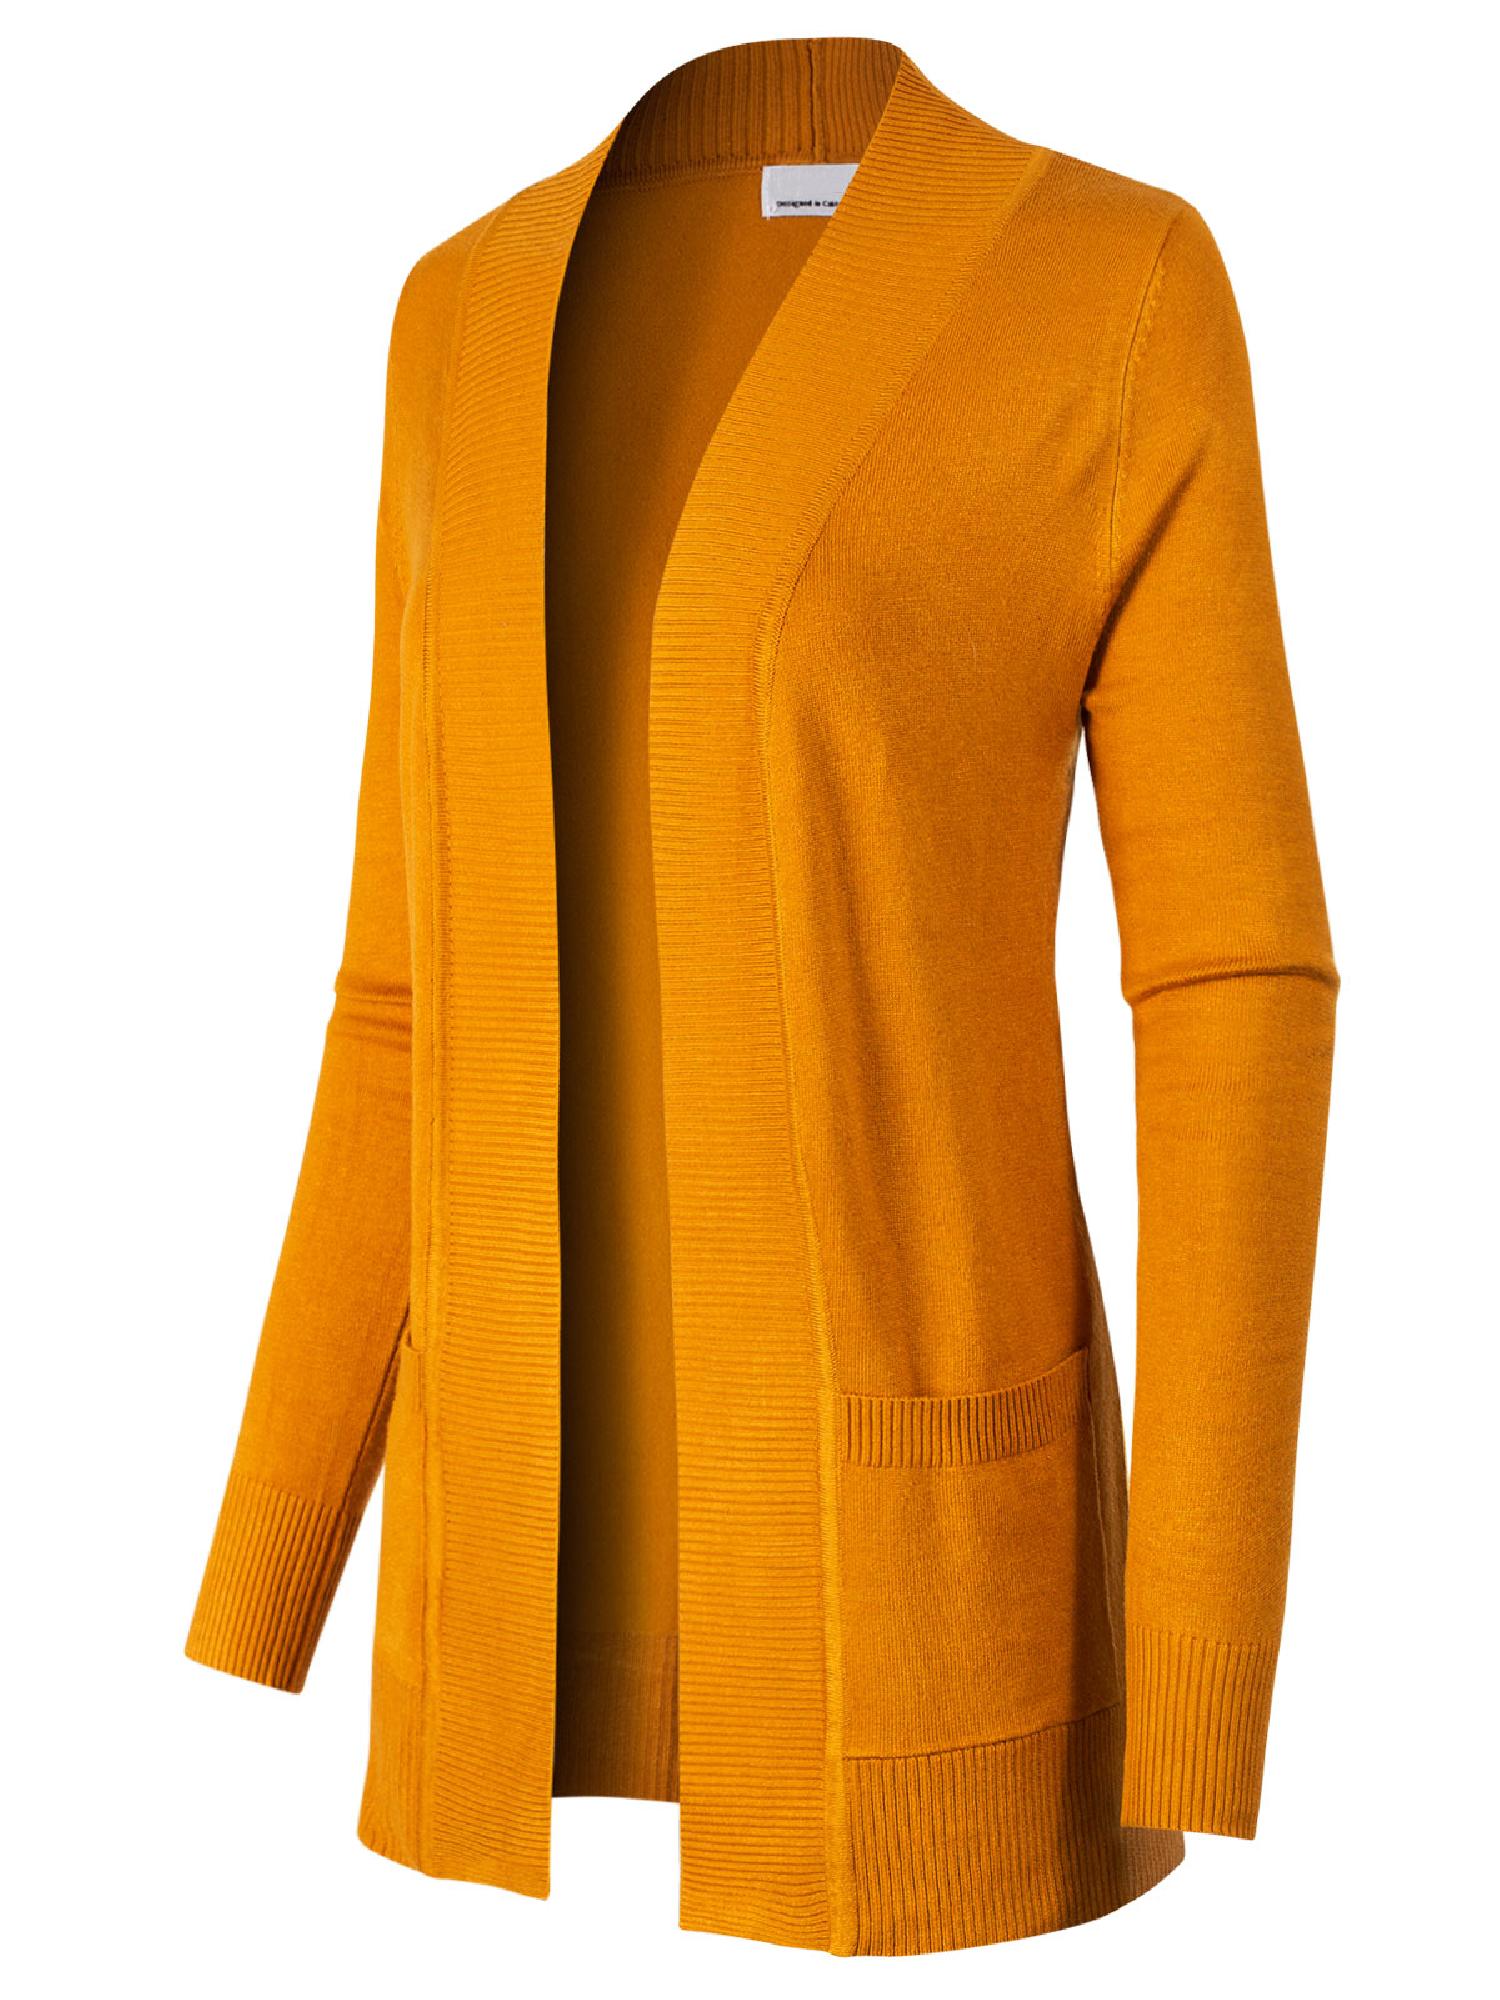 Made by Olivia Women's Open Front Long Sleeve Classic Knit Cardigan - image 3 of 3